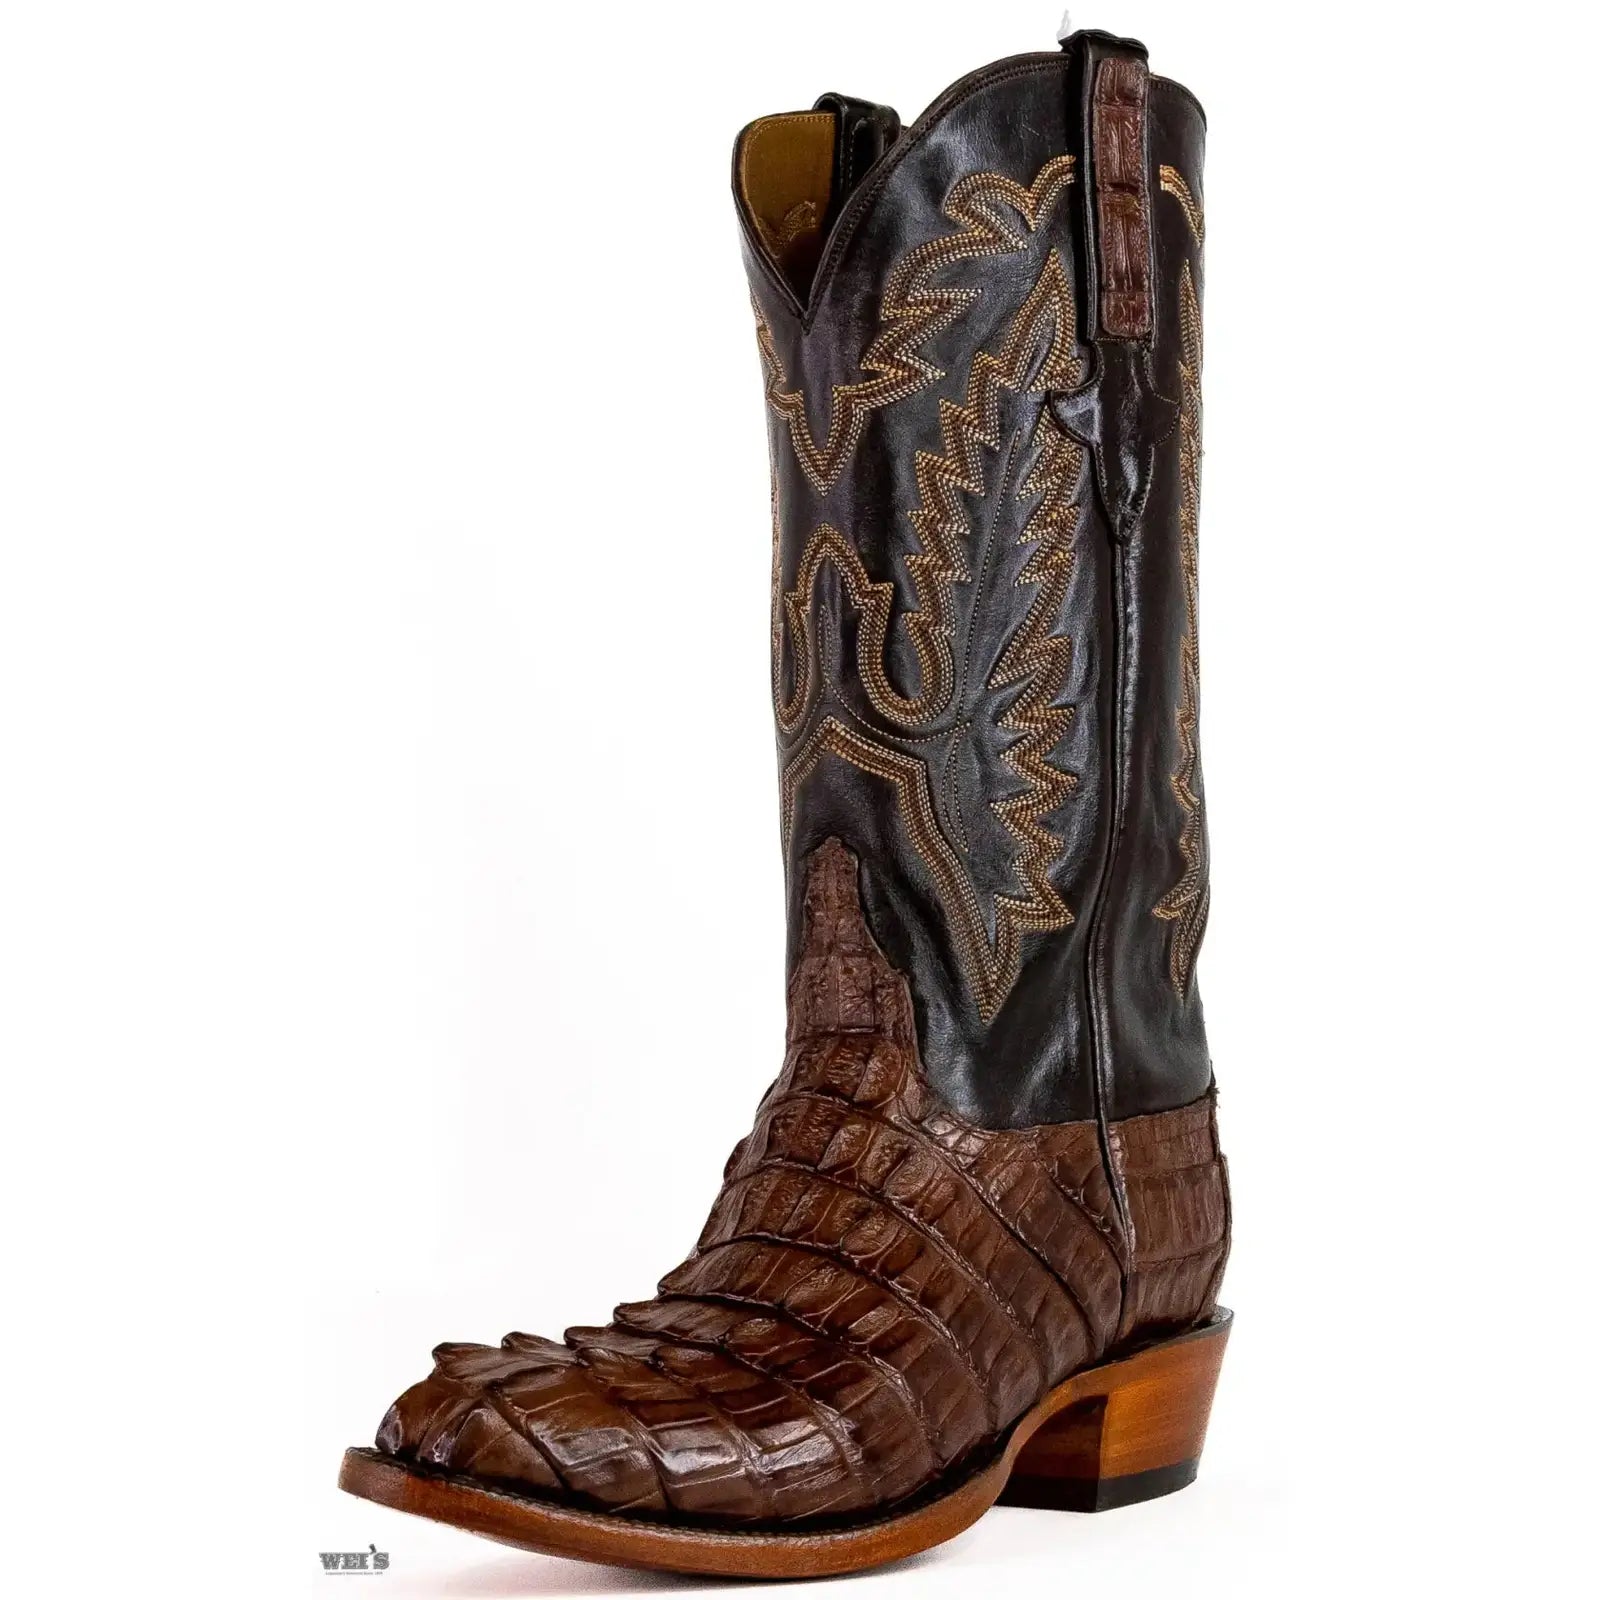 Lucchese Men's Cowboy Boots 14" Caiman Tail / Buffalo Round Toe L1324.63